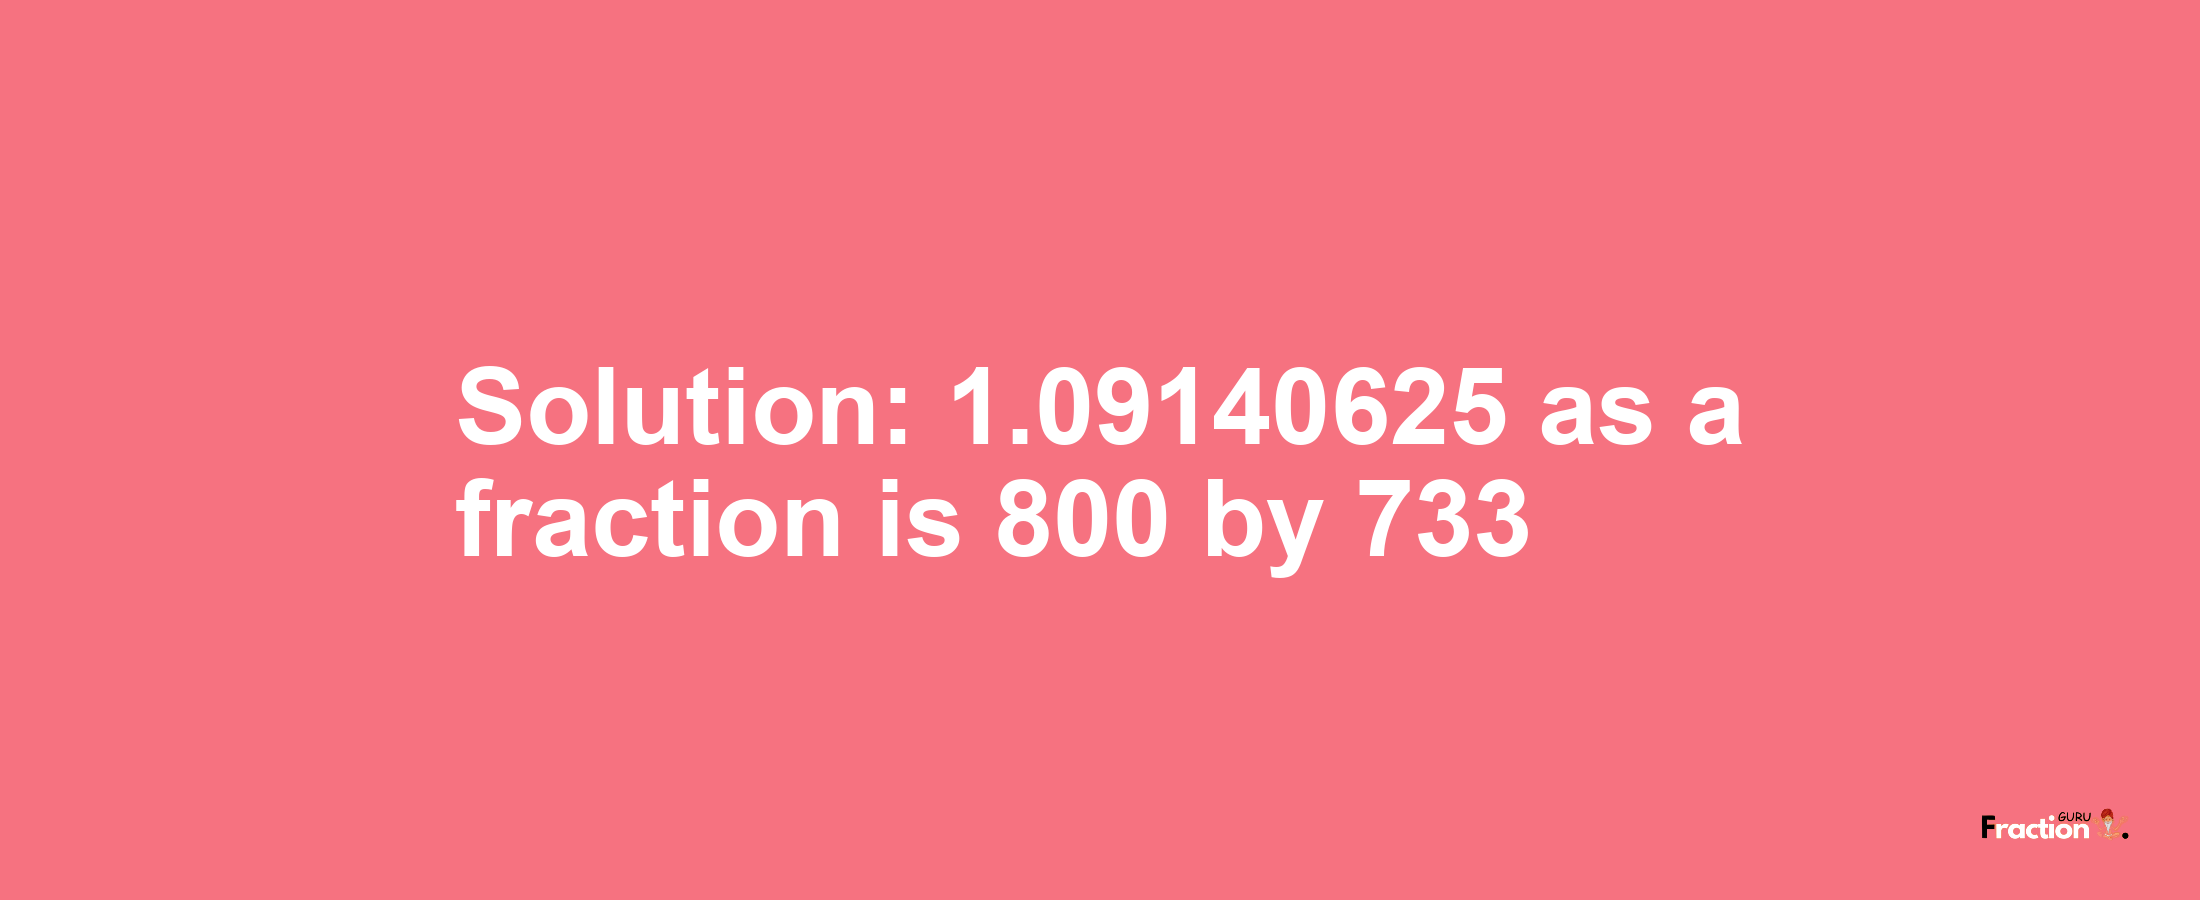 Solution:1.09140625 as a fraction is 800/733